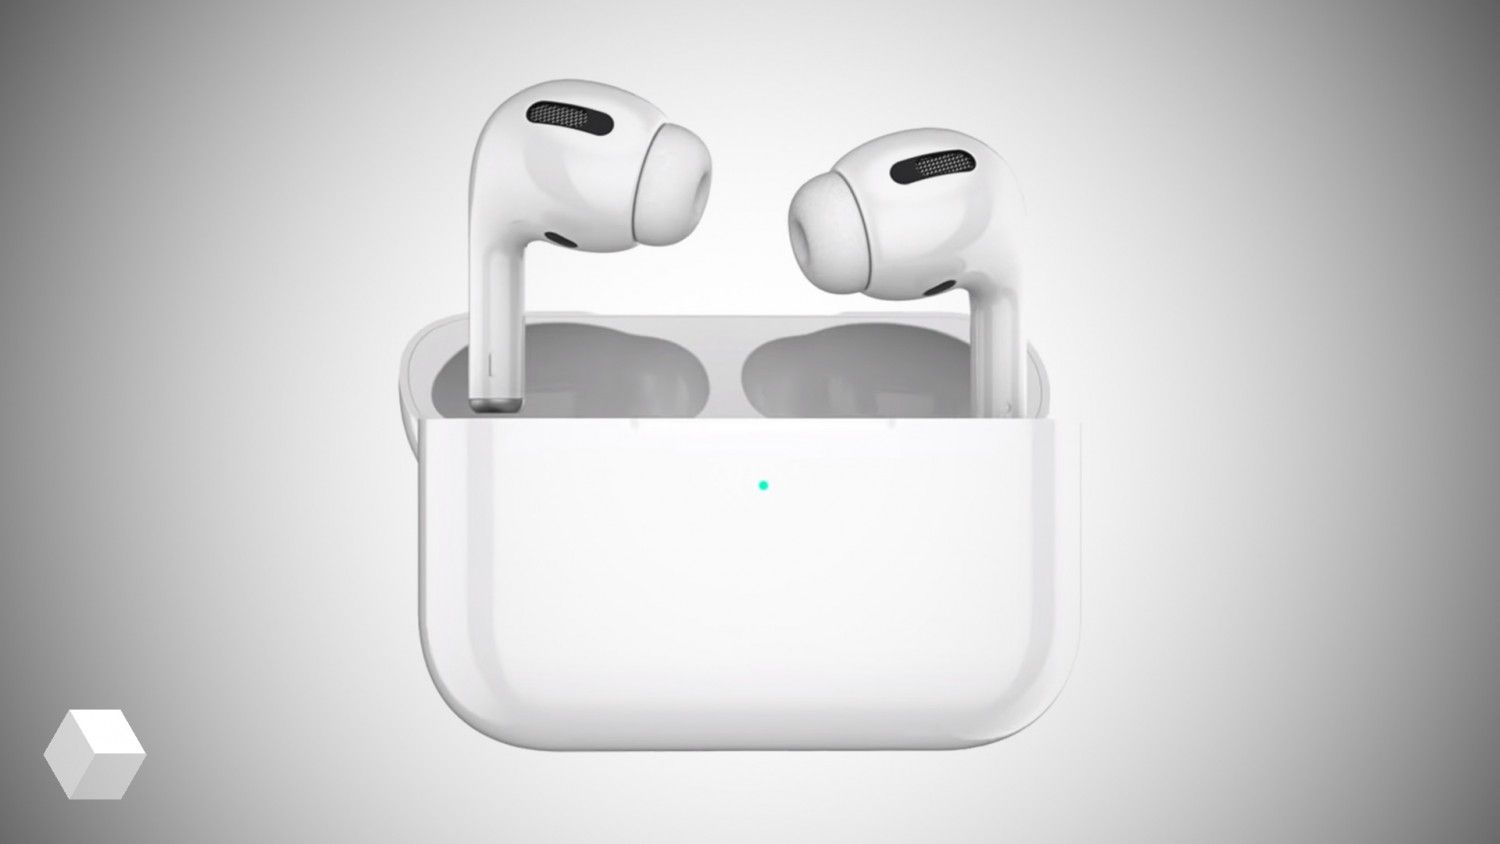 Airpods space. Беспроводная гарнитура Apple AIRPODS Pro 2. Наушники Apple AIRPODS 3rd Generation. Apple AIRPODS Pro 2022. Apple наушники беспроводные AIRPODS Pro 2022.